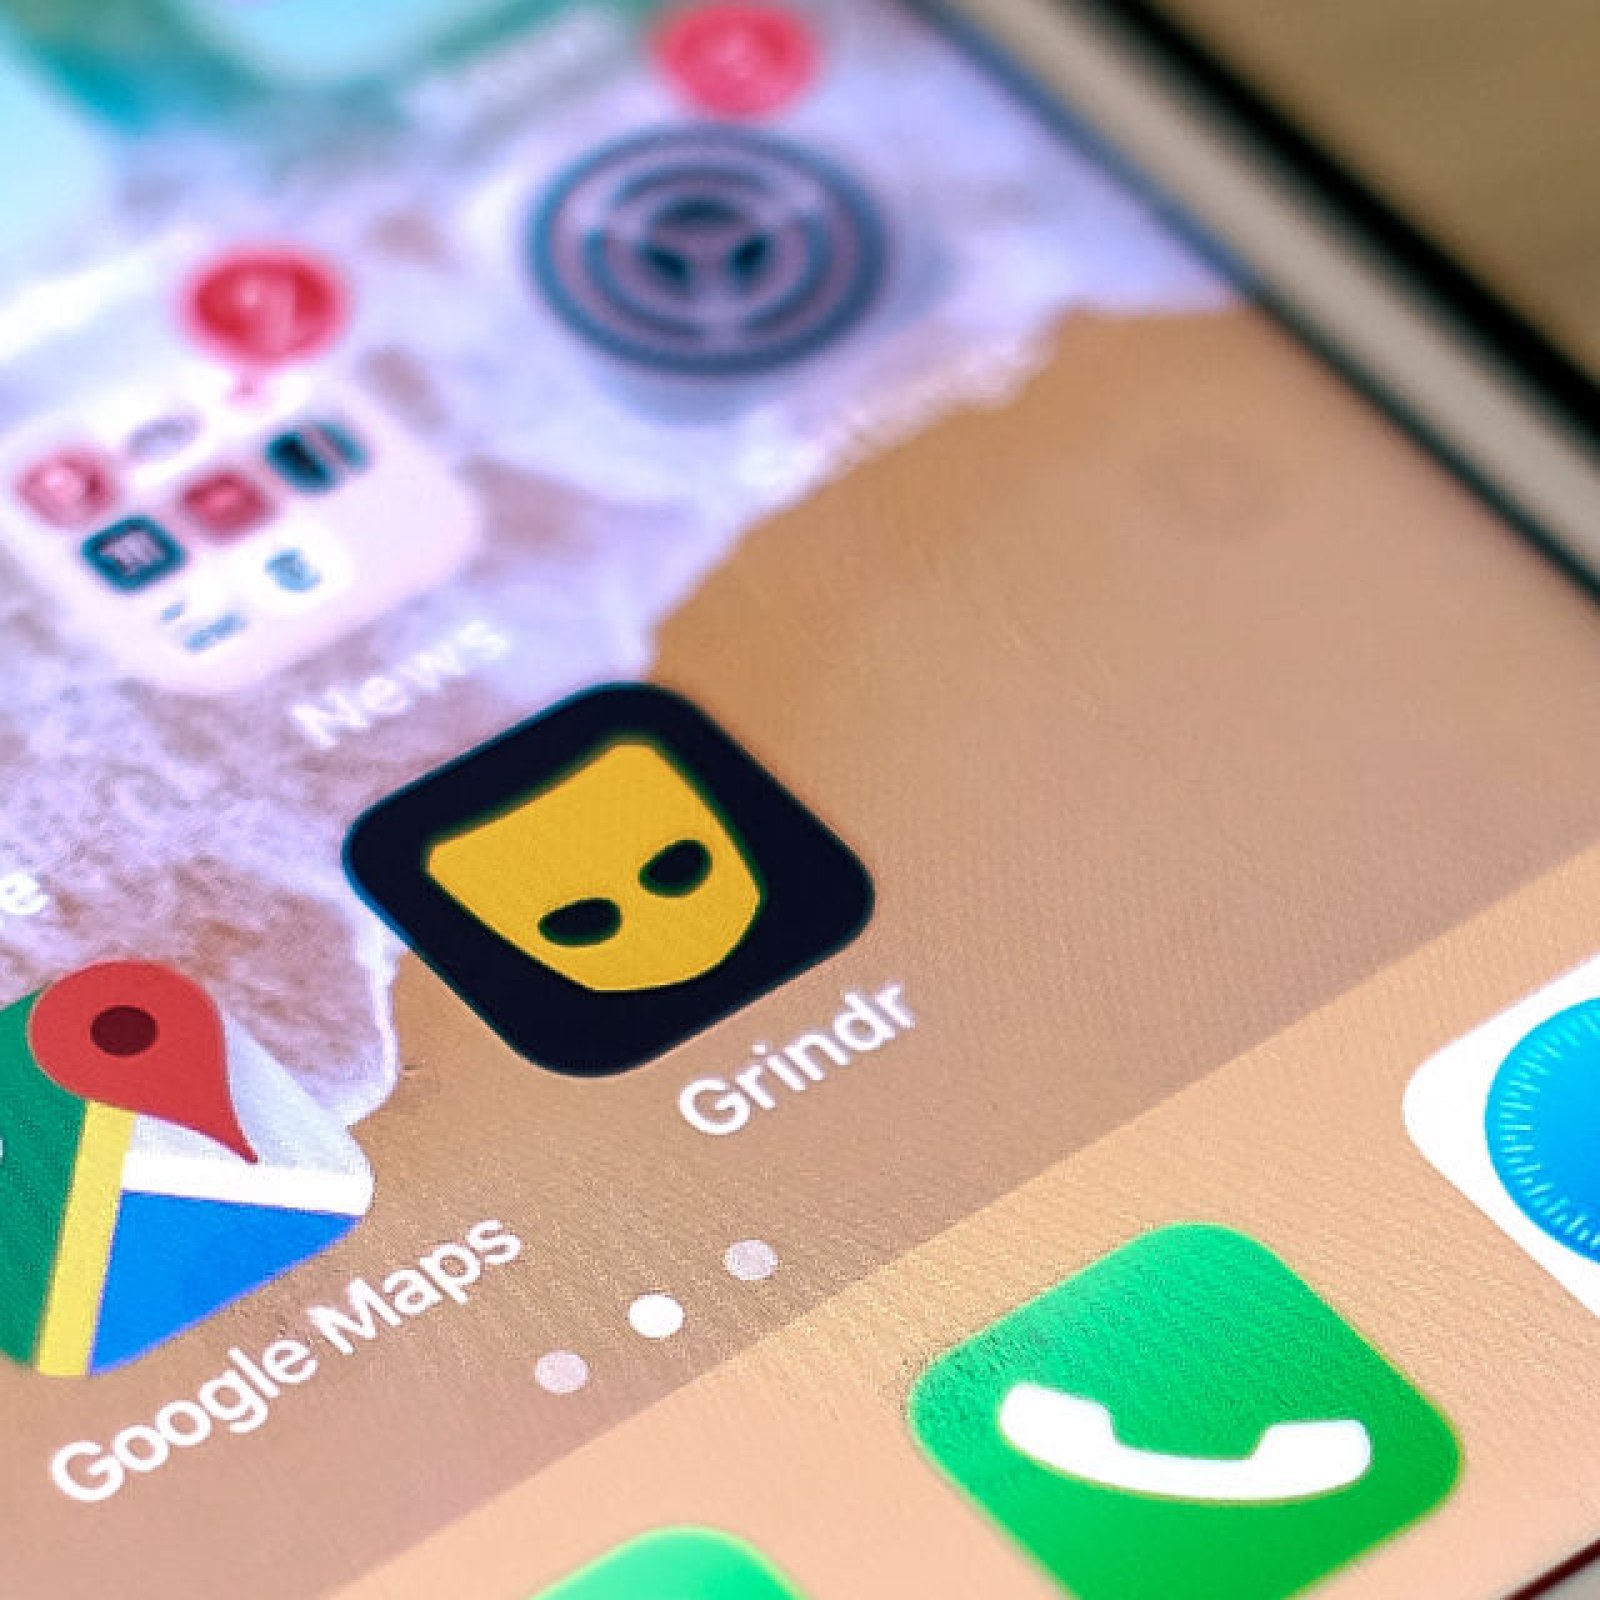 Enormous Grindr Security Flaw Could Have Let Anyone Reset Your Password and  Take Over Your Account